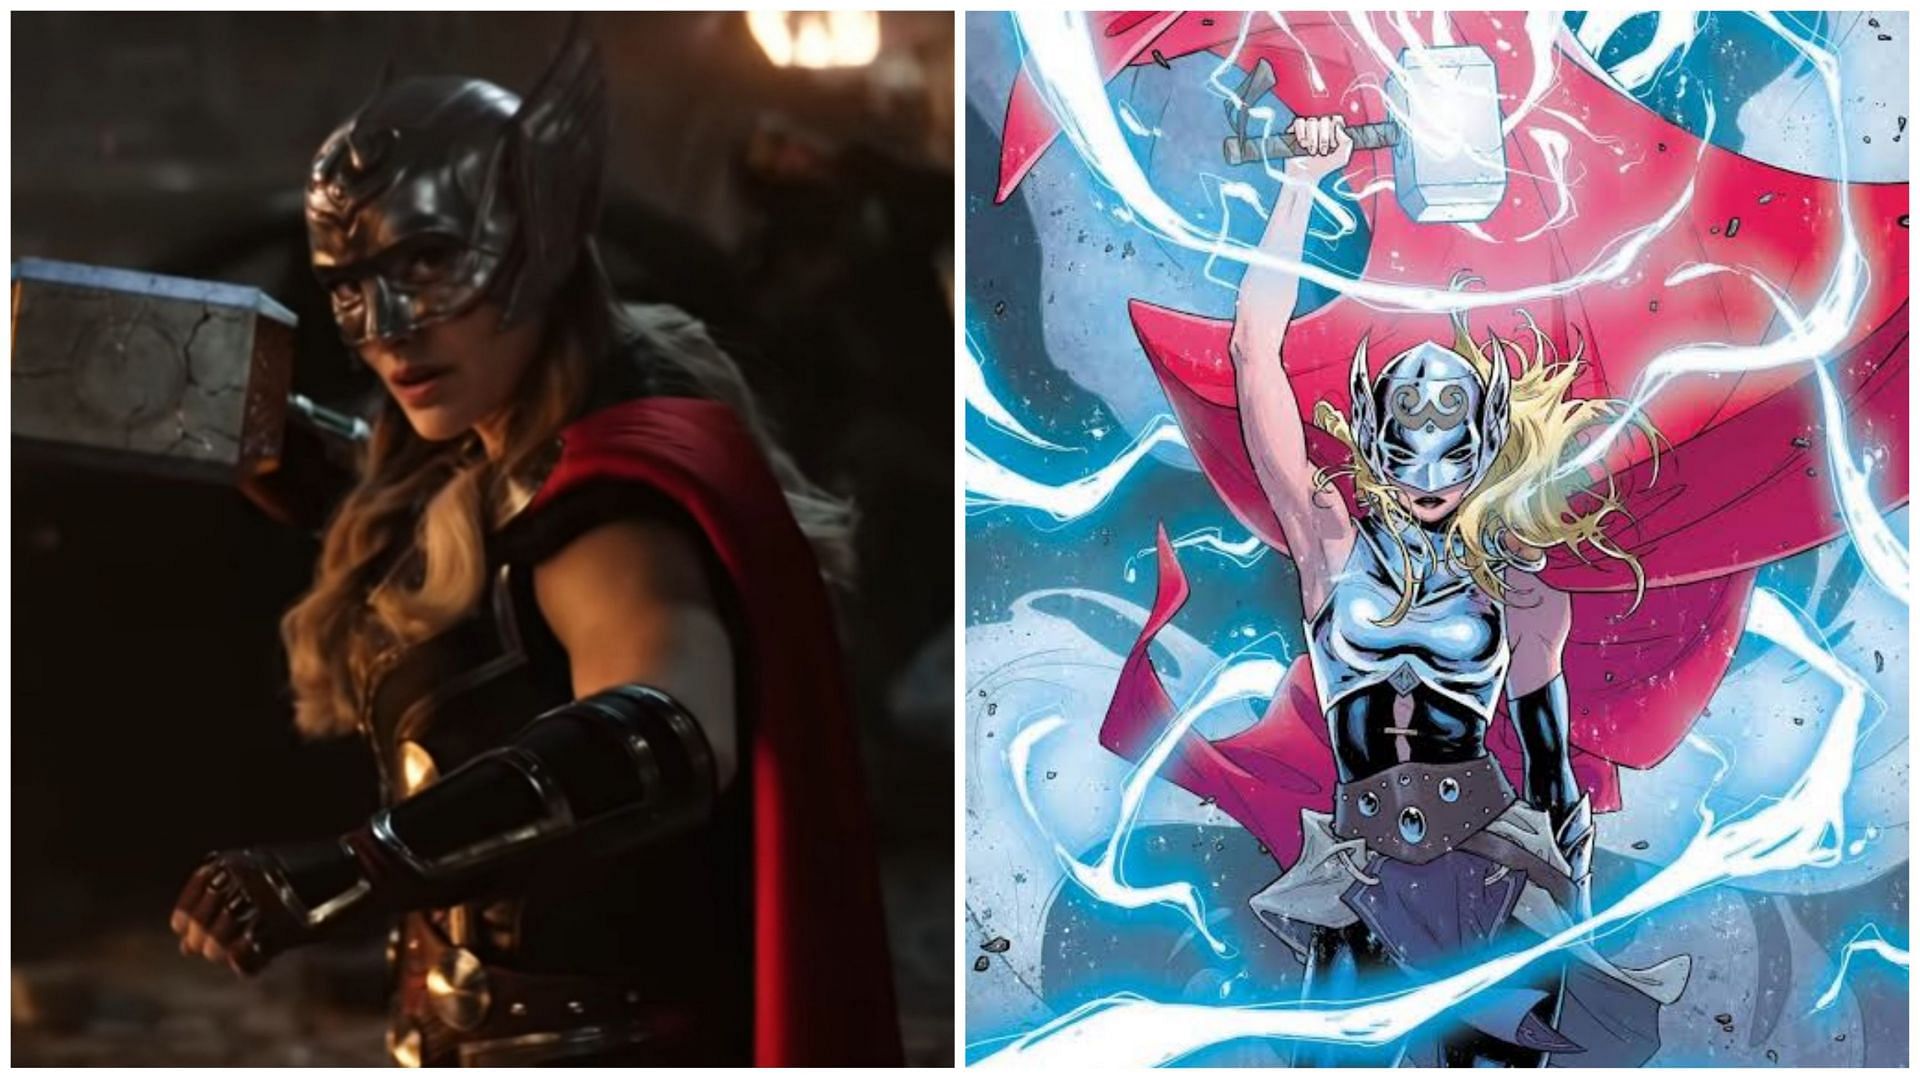 Mighty Thor from the movie and comics (Images via Marvel Studios and Marvel Comics)